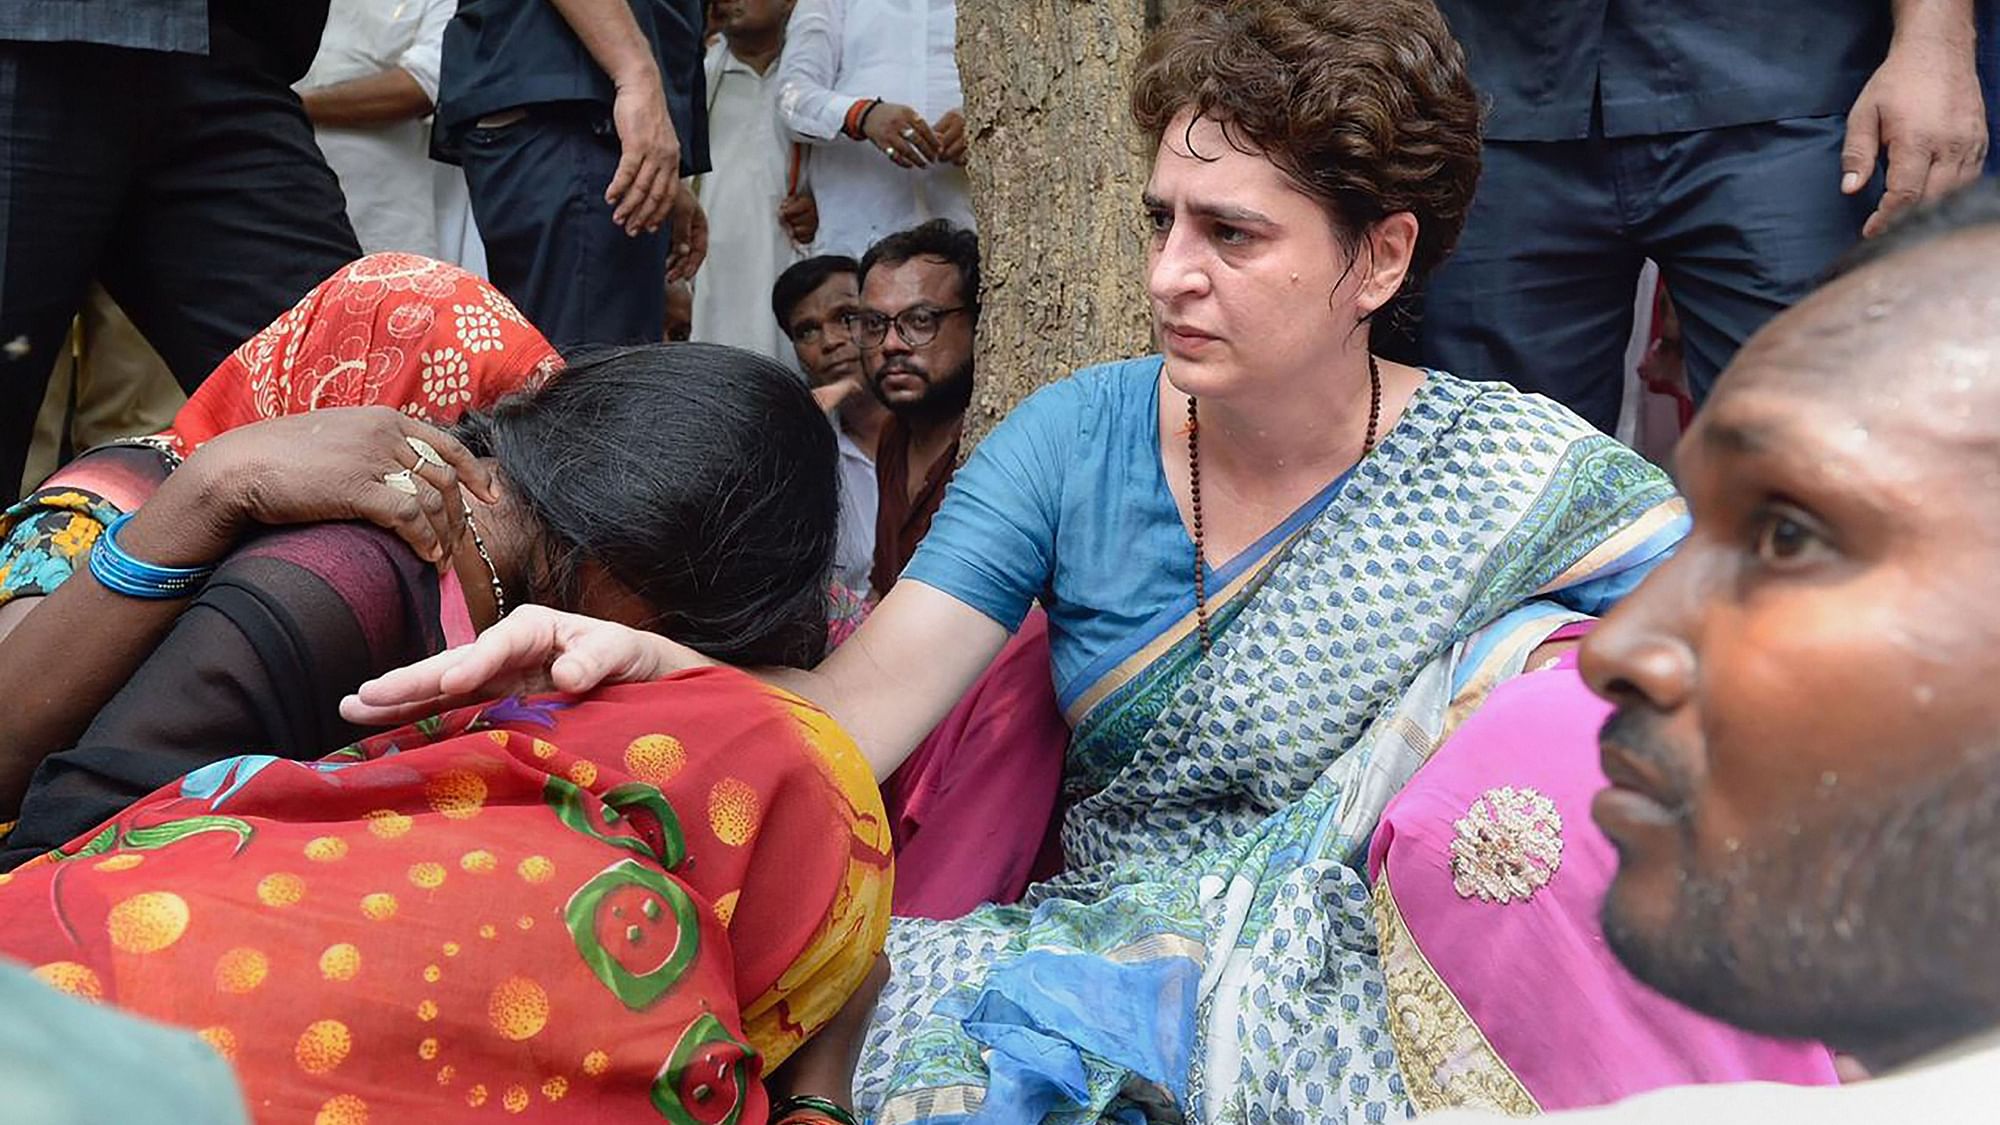 Priyanka Gandhi on Saturday said that after meeting the relatives of the Sonbhadra victims, her objective had been fulfilled.